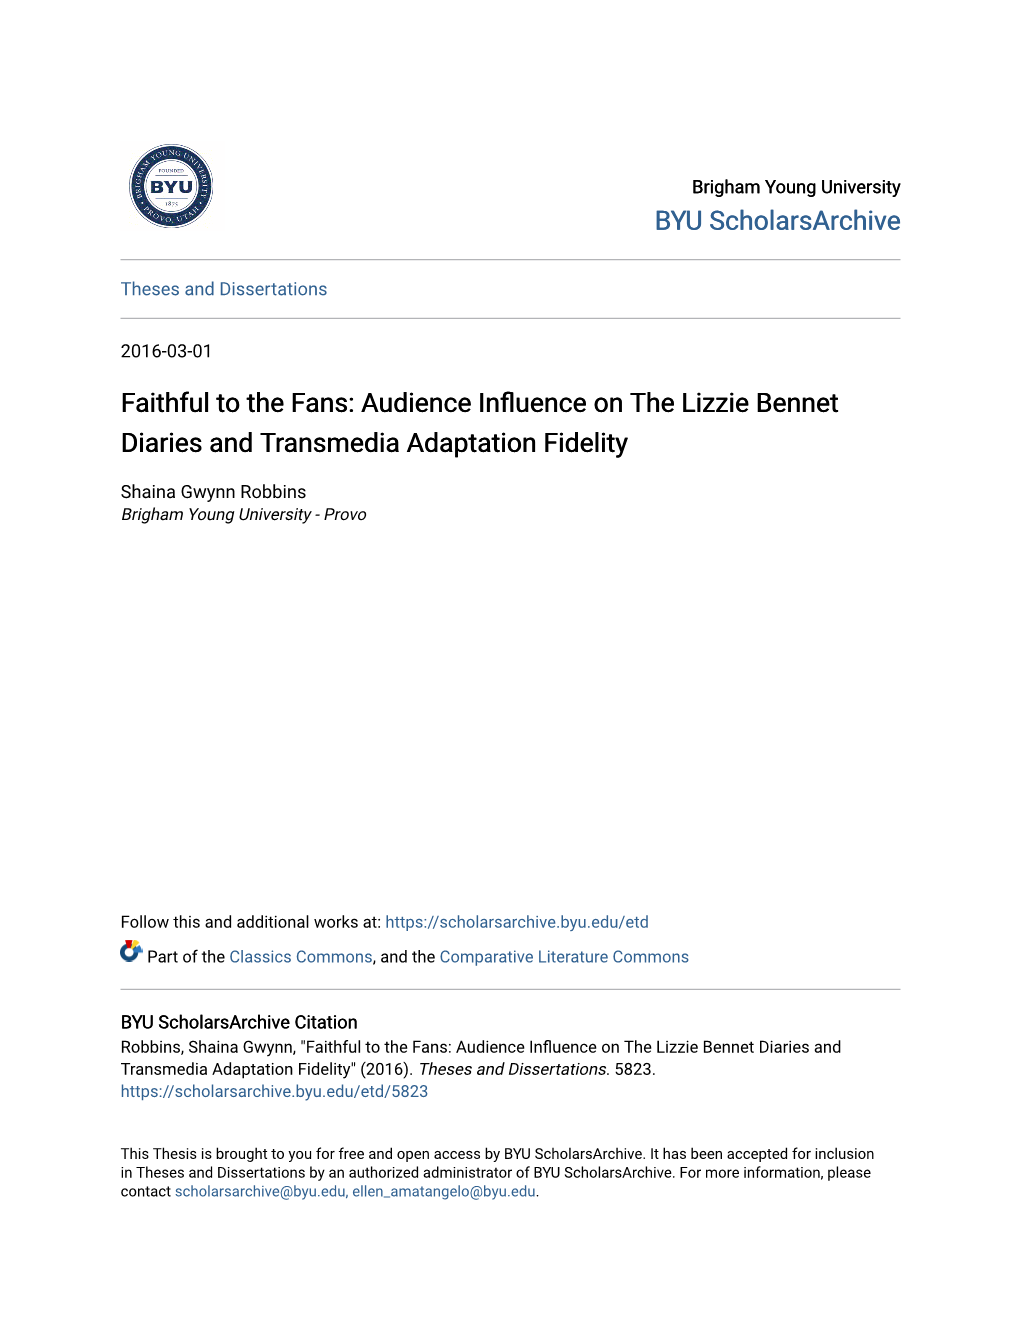 Audience Influence on the Lizzie Bennet Diaries and Transmedia Adaptation Fidelity